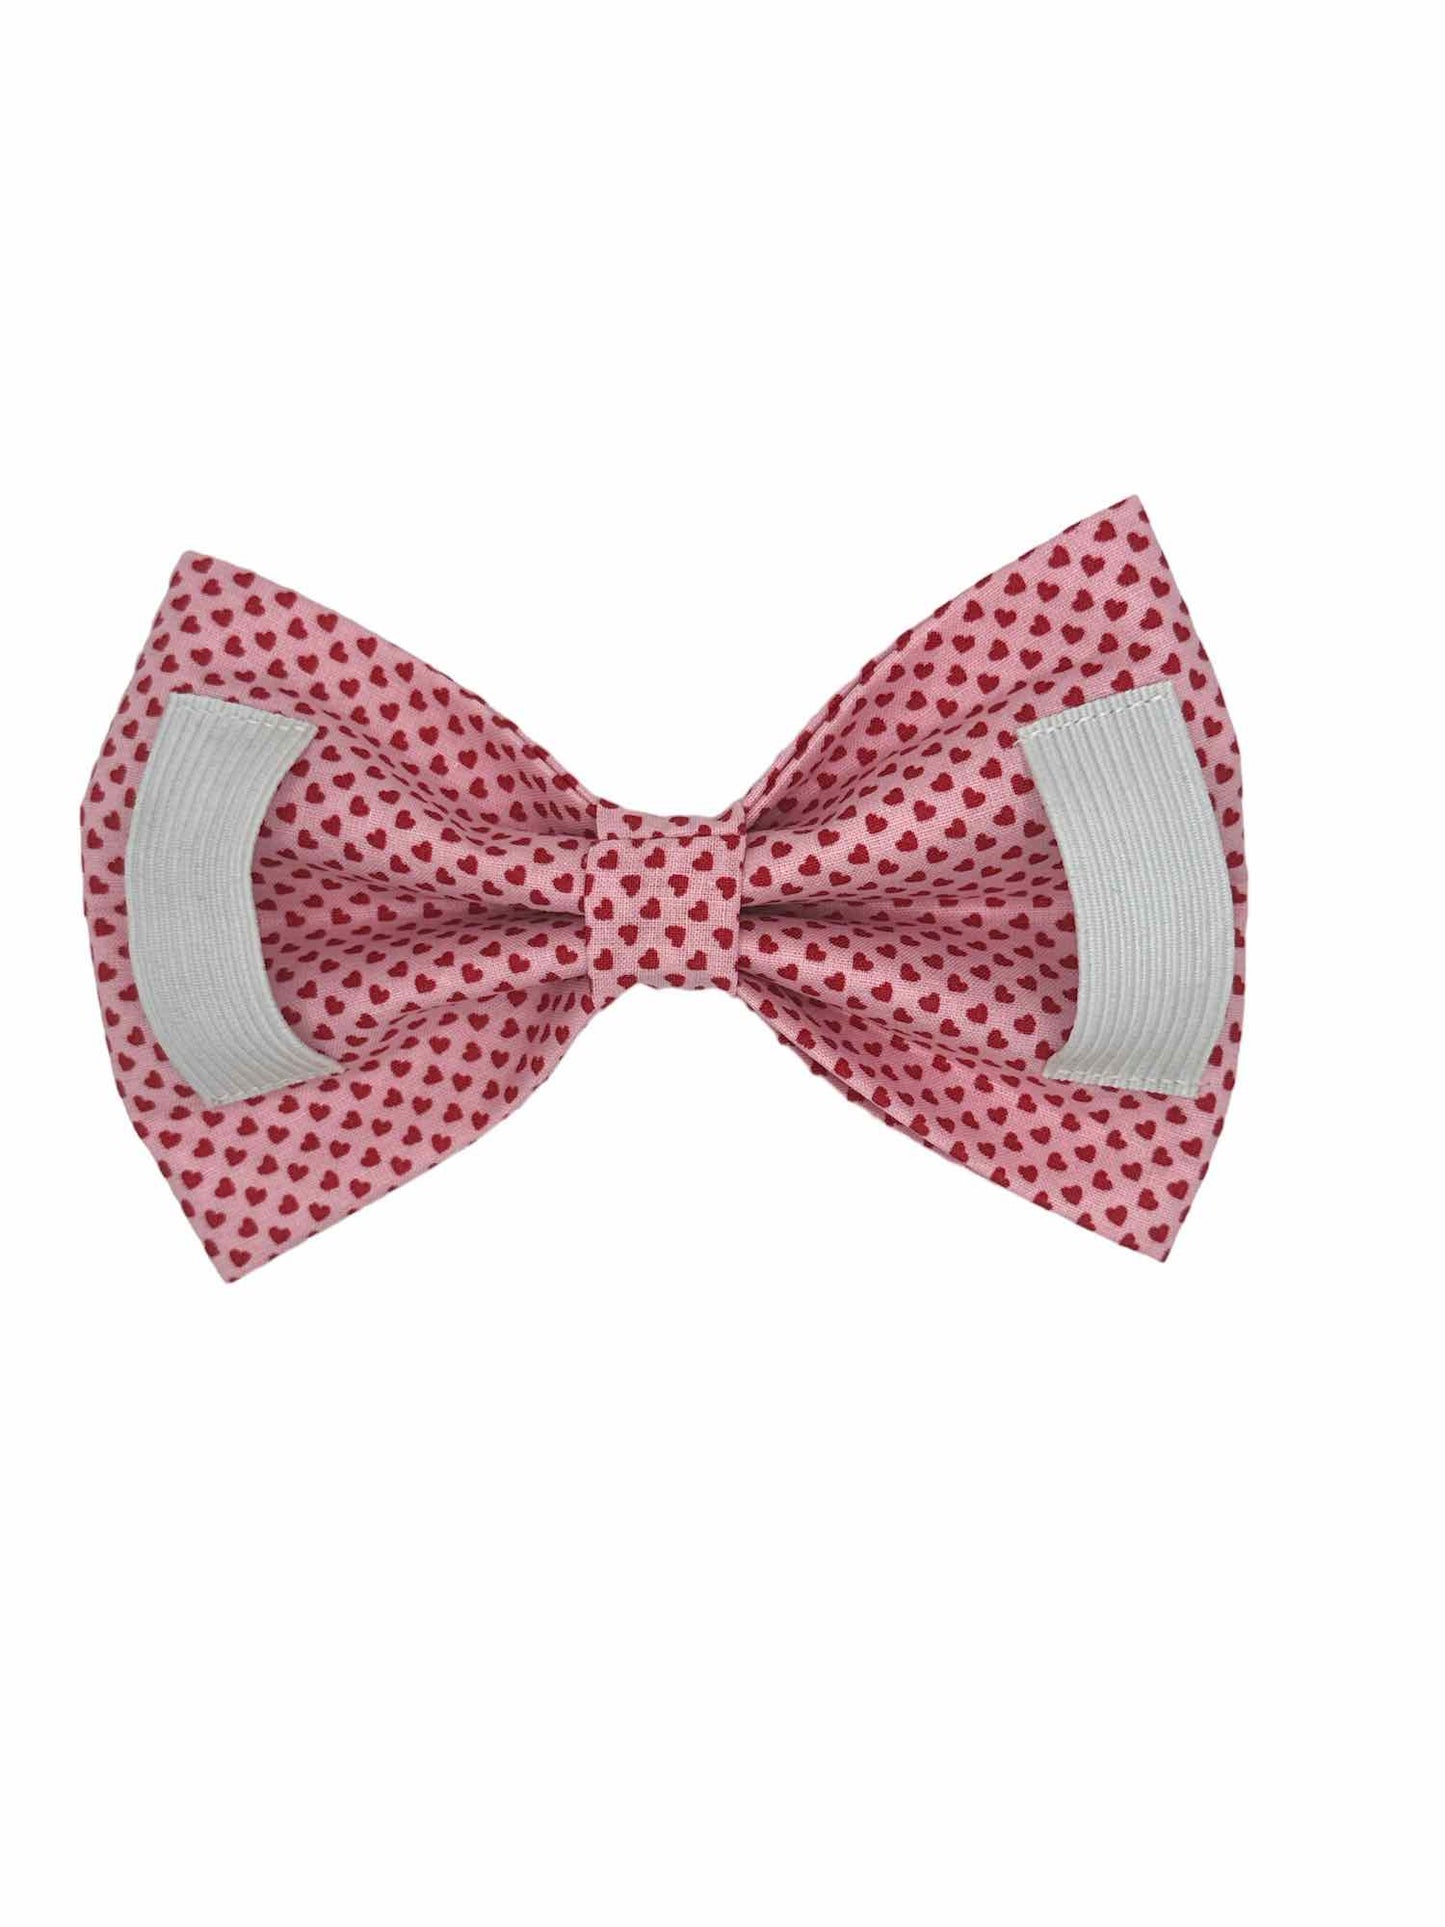 My Heart Skips A Beat Bow Tie